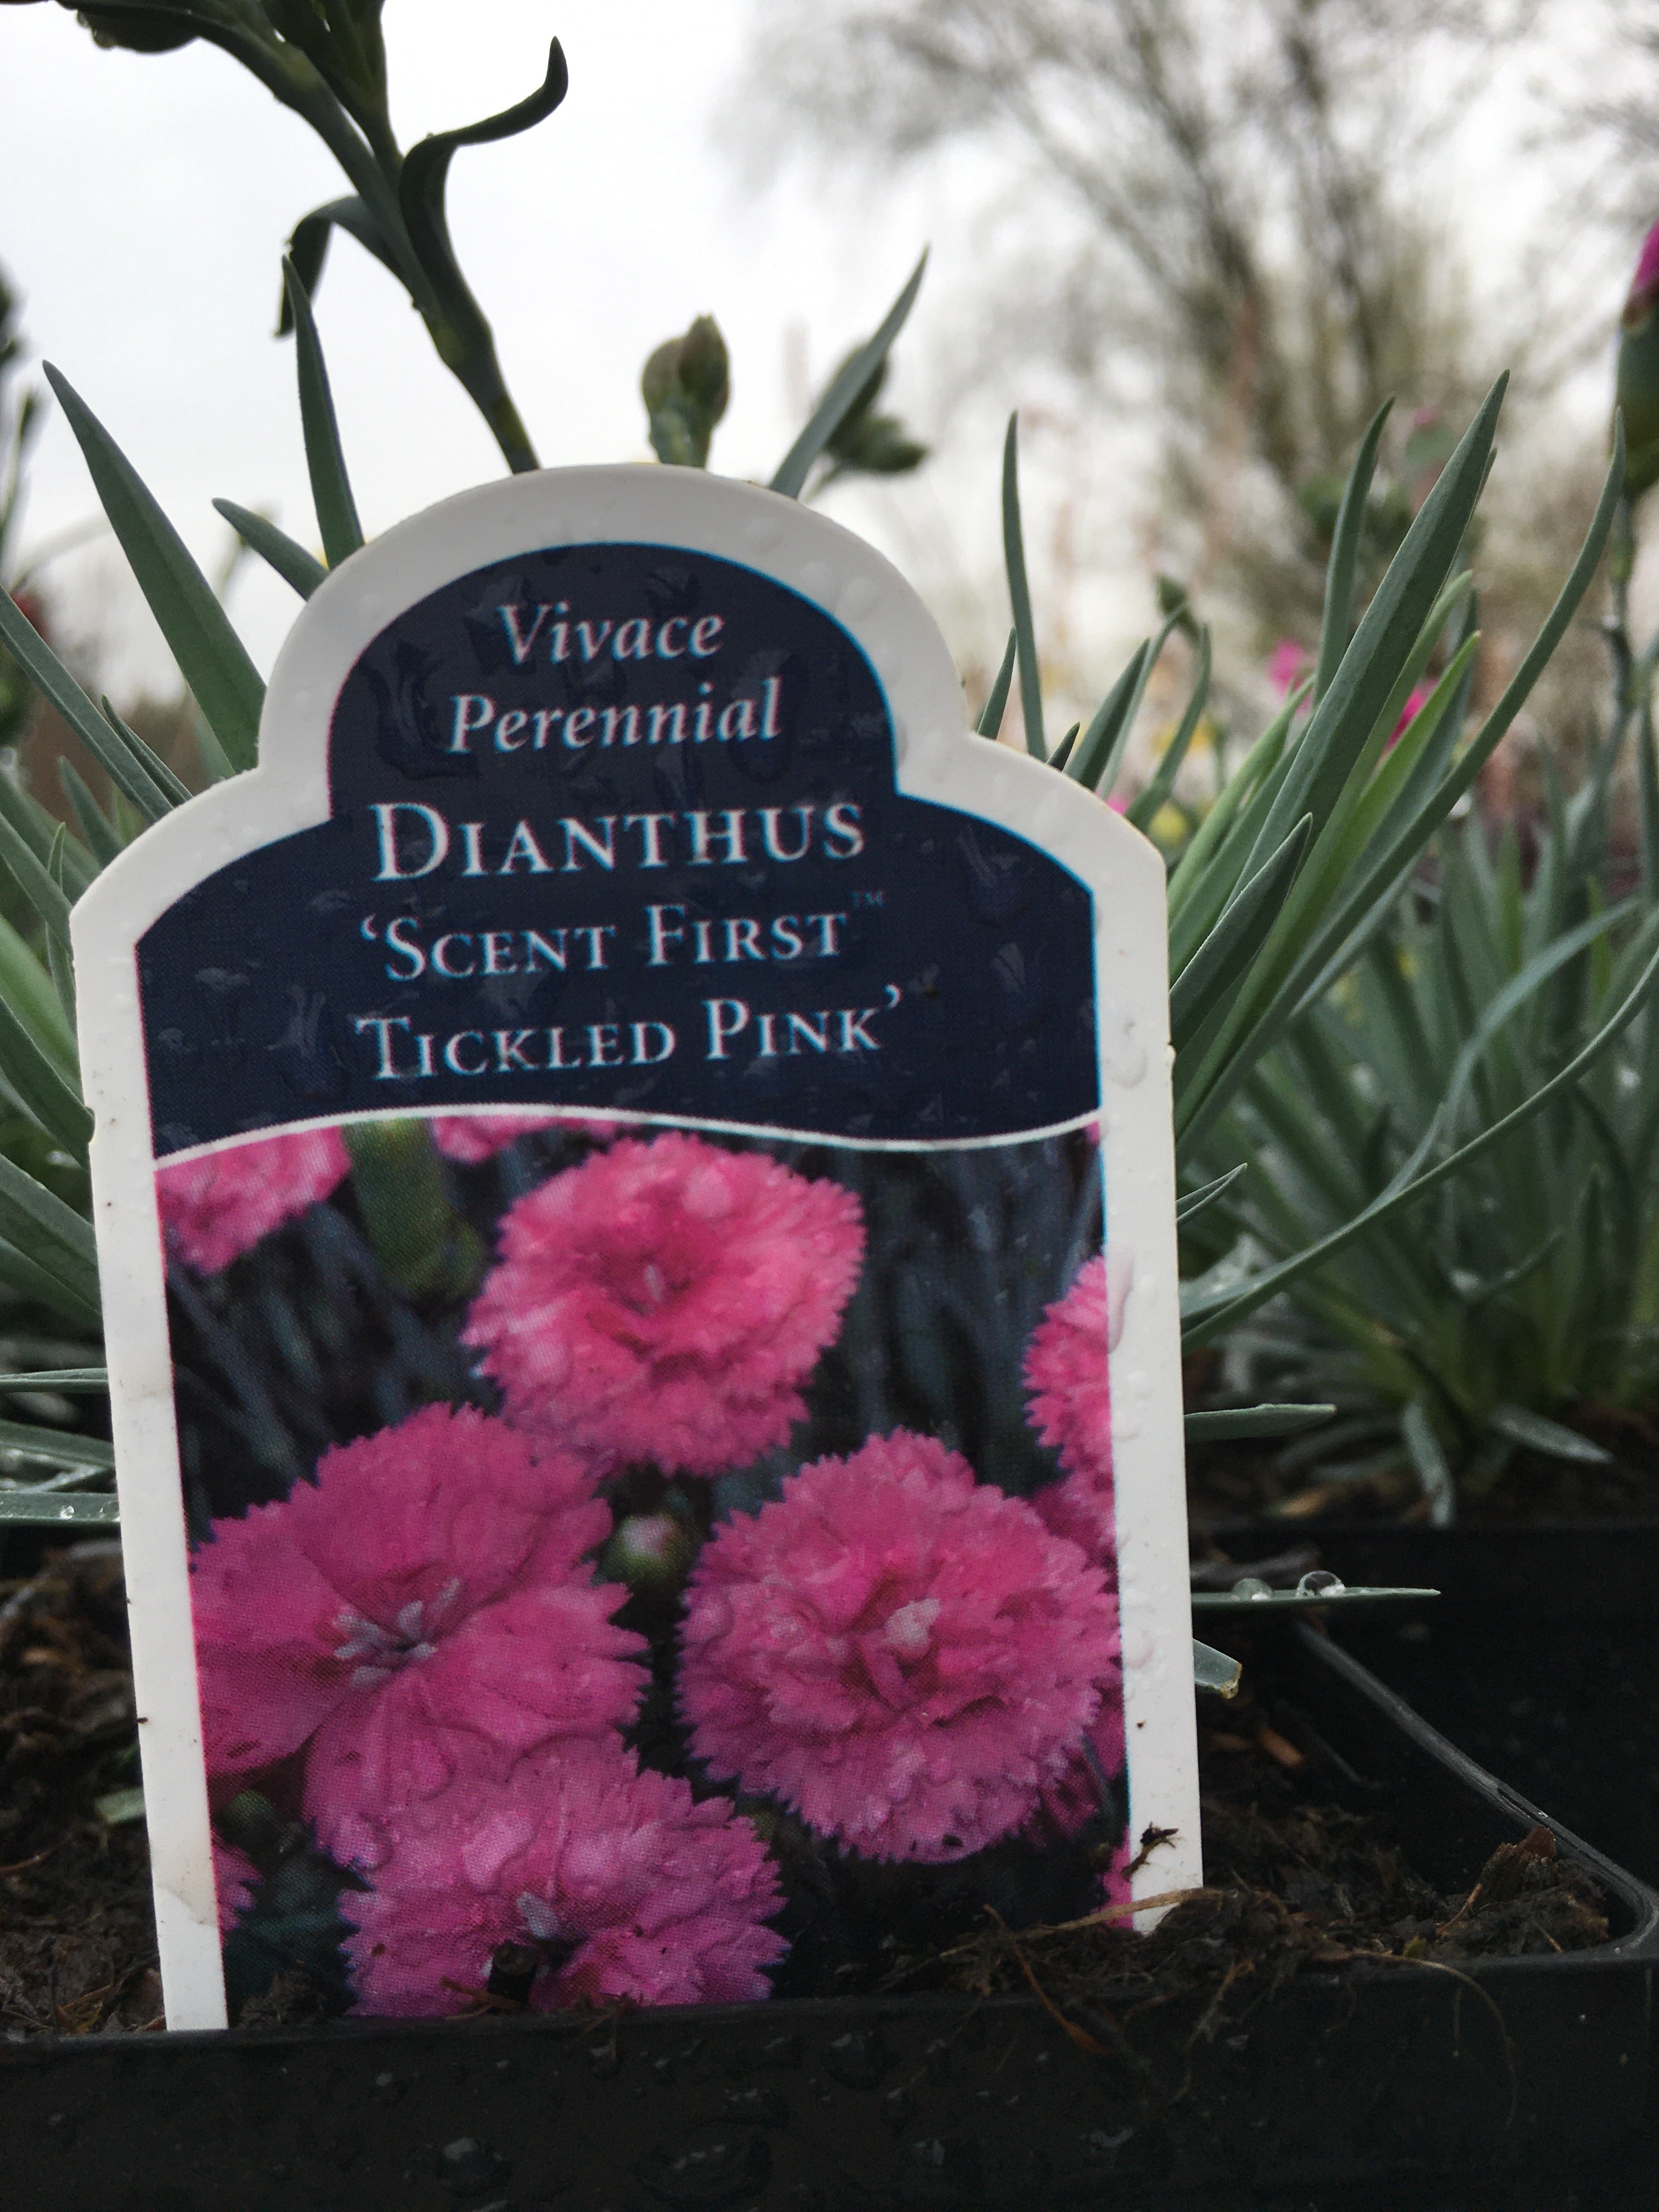 Dianthus - Scent First Tickled Pink (5 inch)